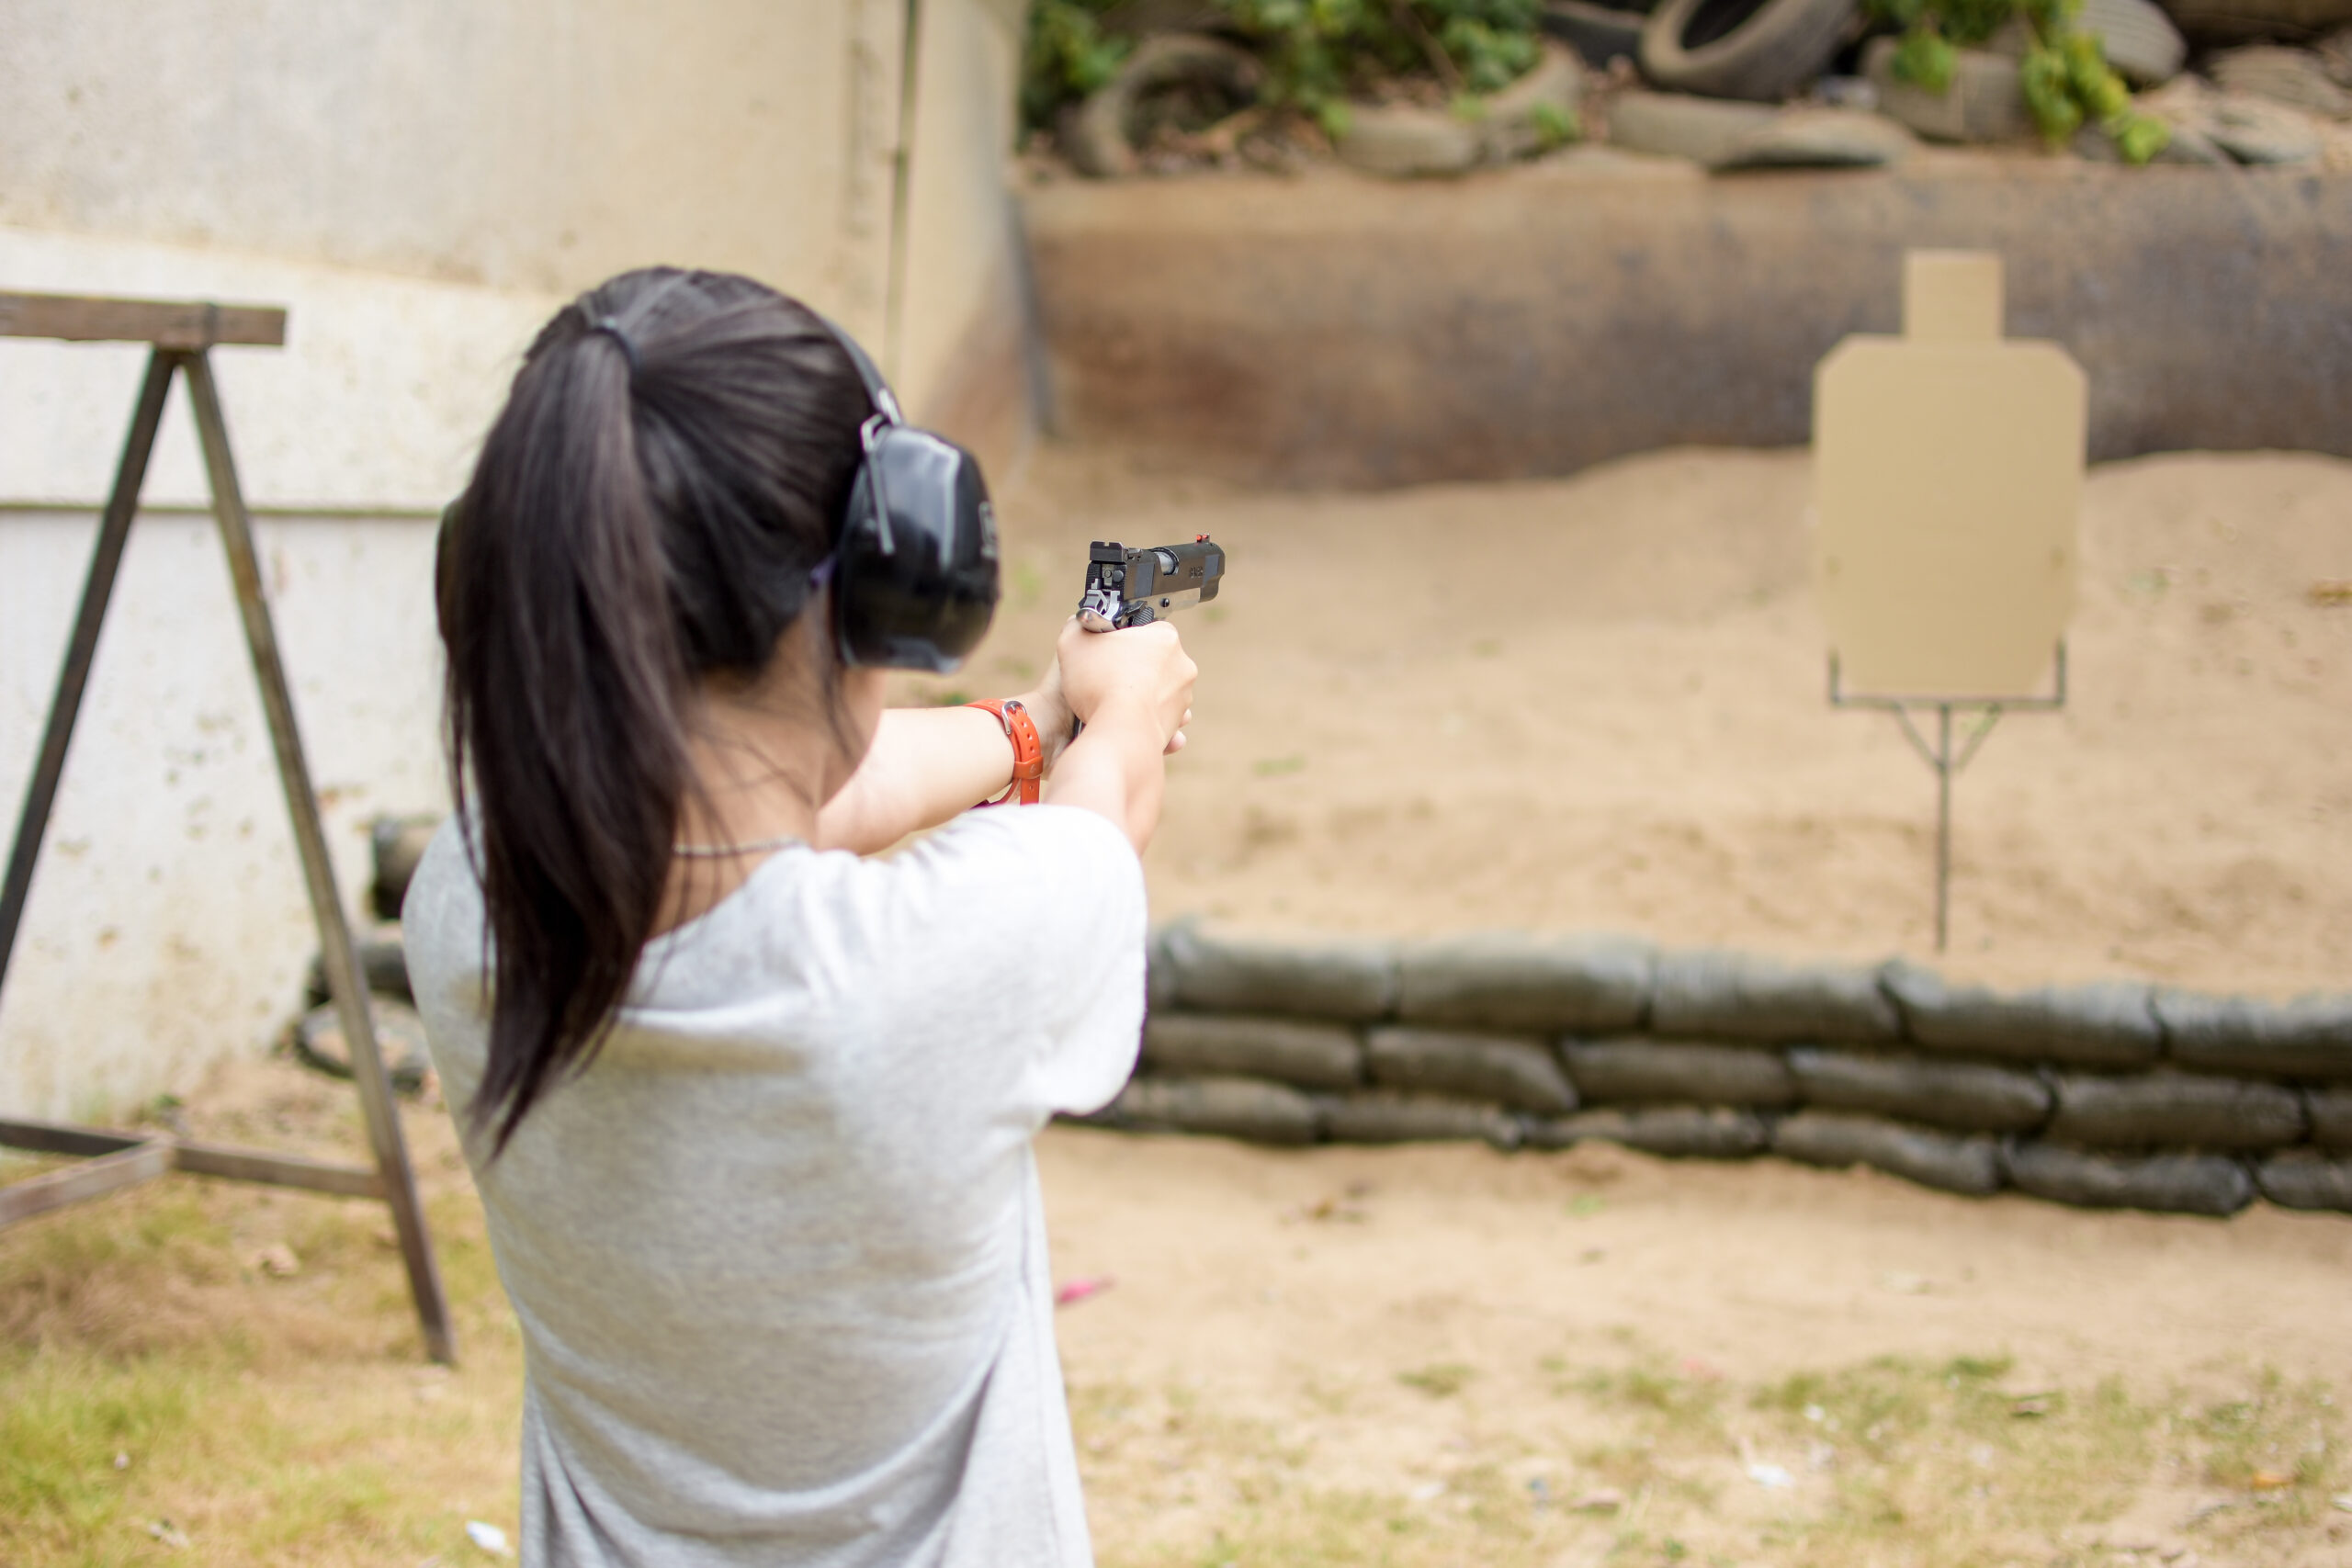 The fastest growing group of concealed carry permit owners may surprise you